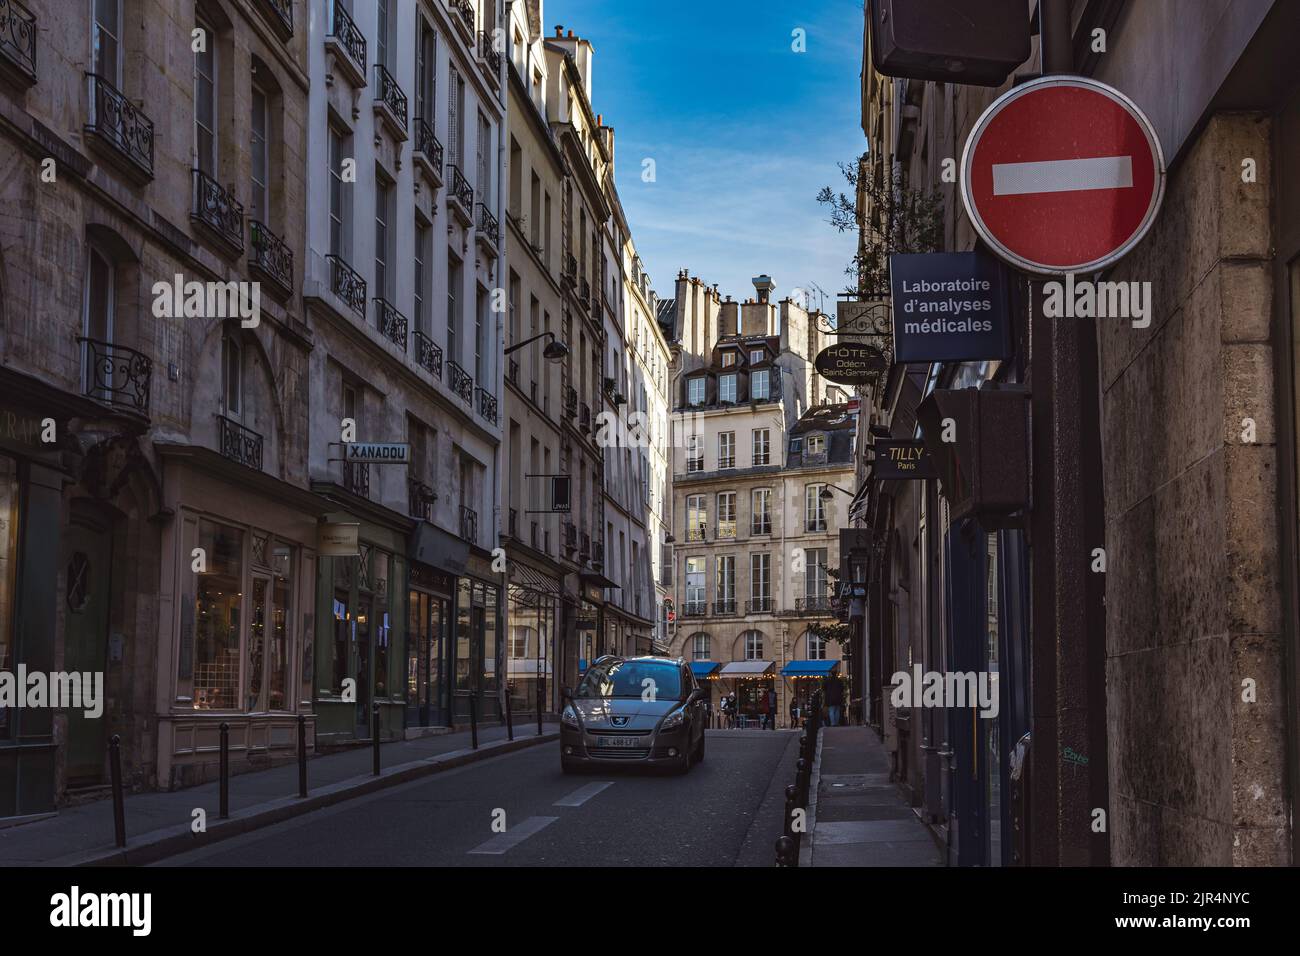 A view of a Peugeot 5008 driving on a street in Paris, France Stock Photo